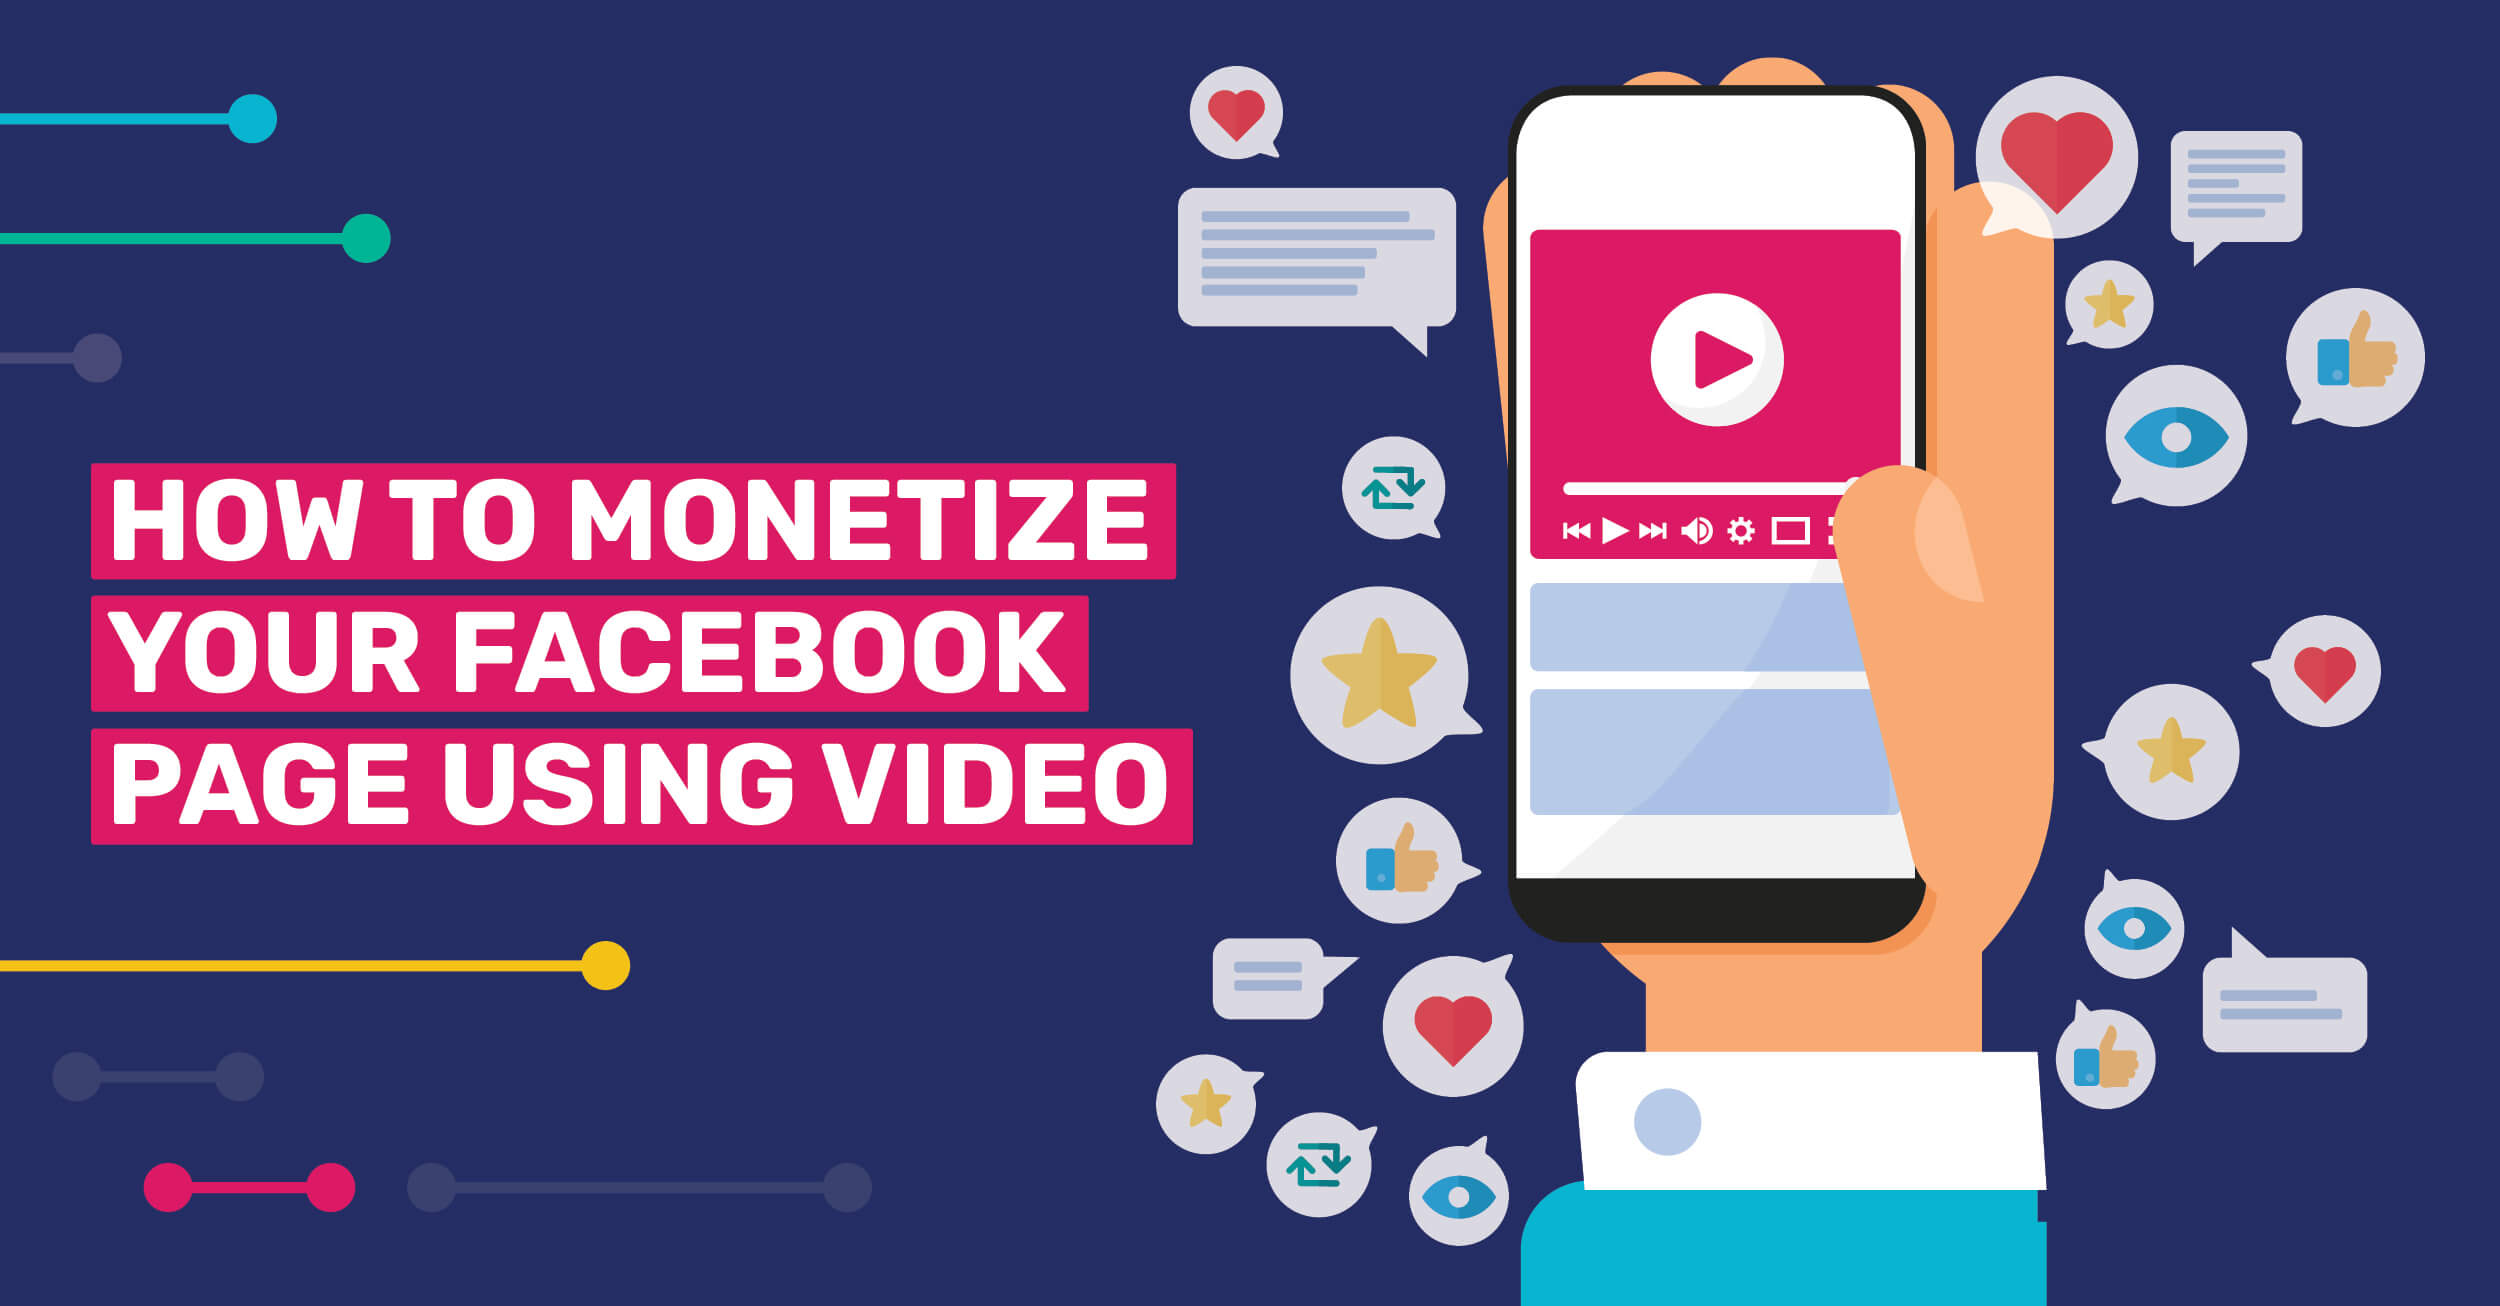 5 Easy Ways to Monetize Your Facebook Page for Profit